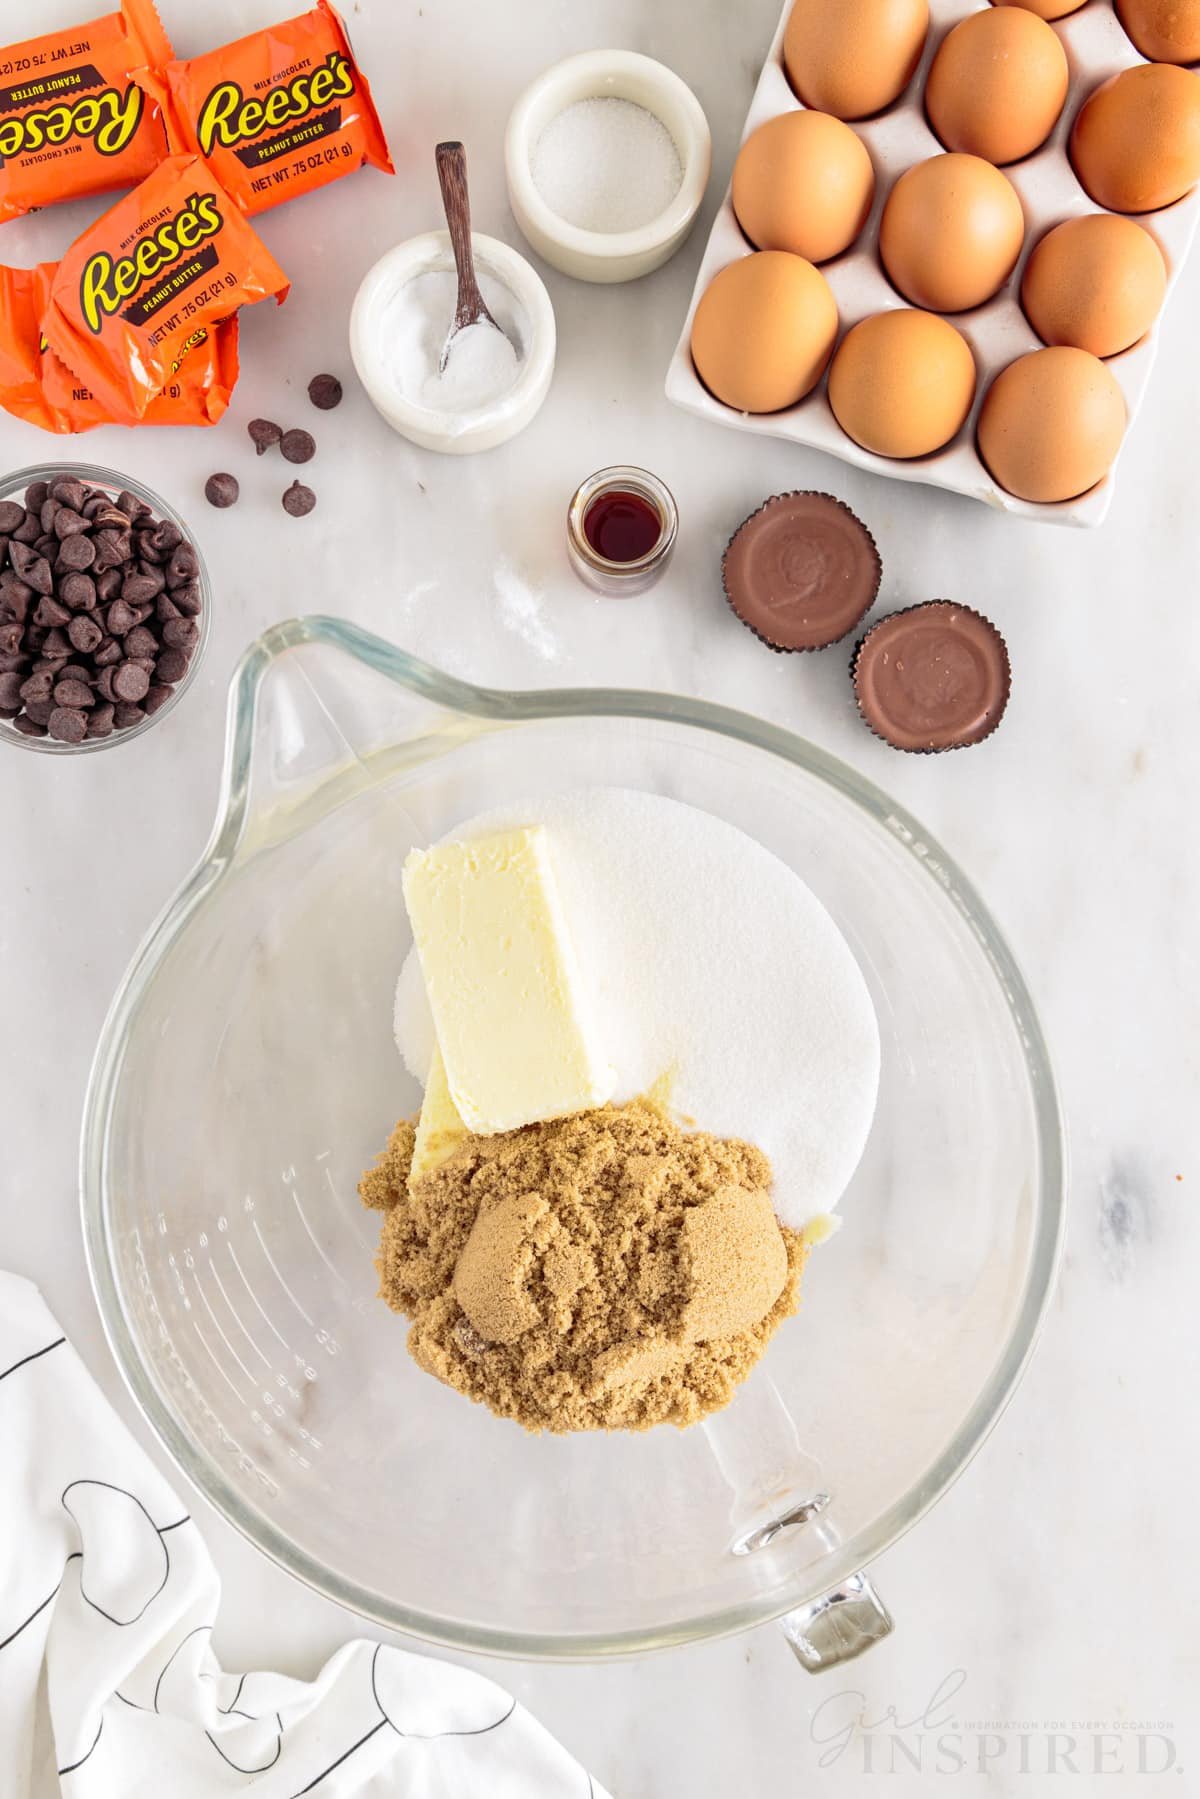 Sugar, butter, and brown sugar in a mixing bowl next to additional ingredients.